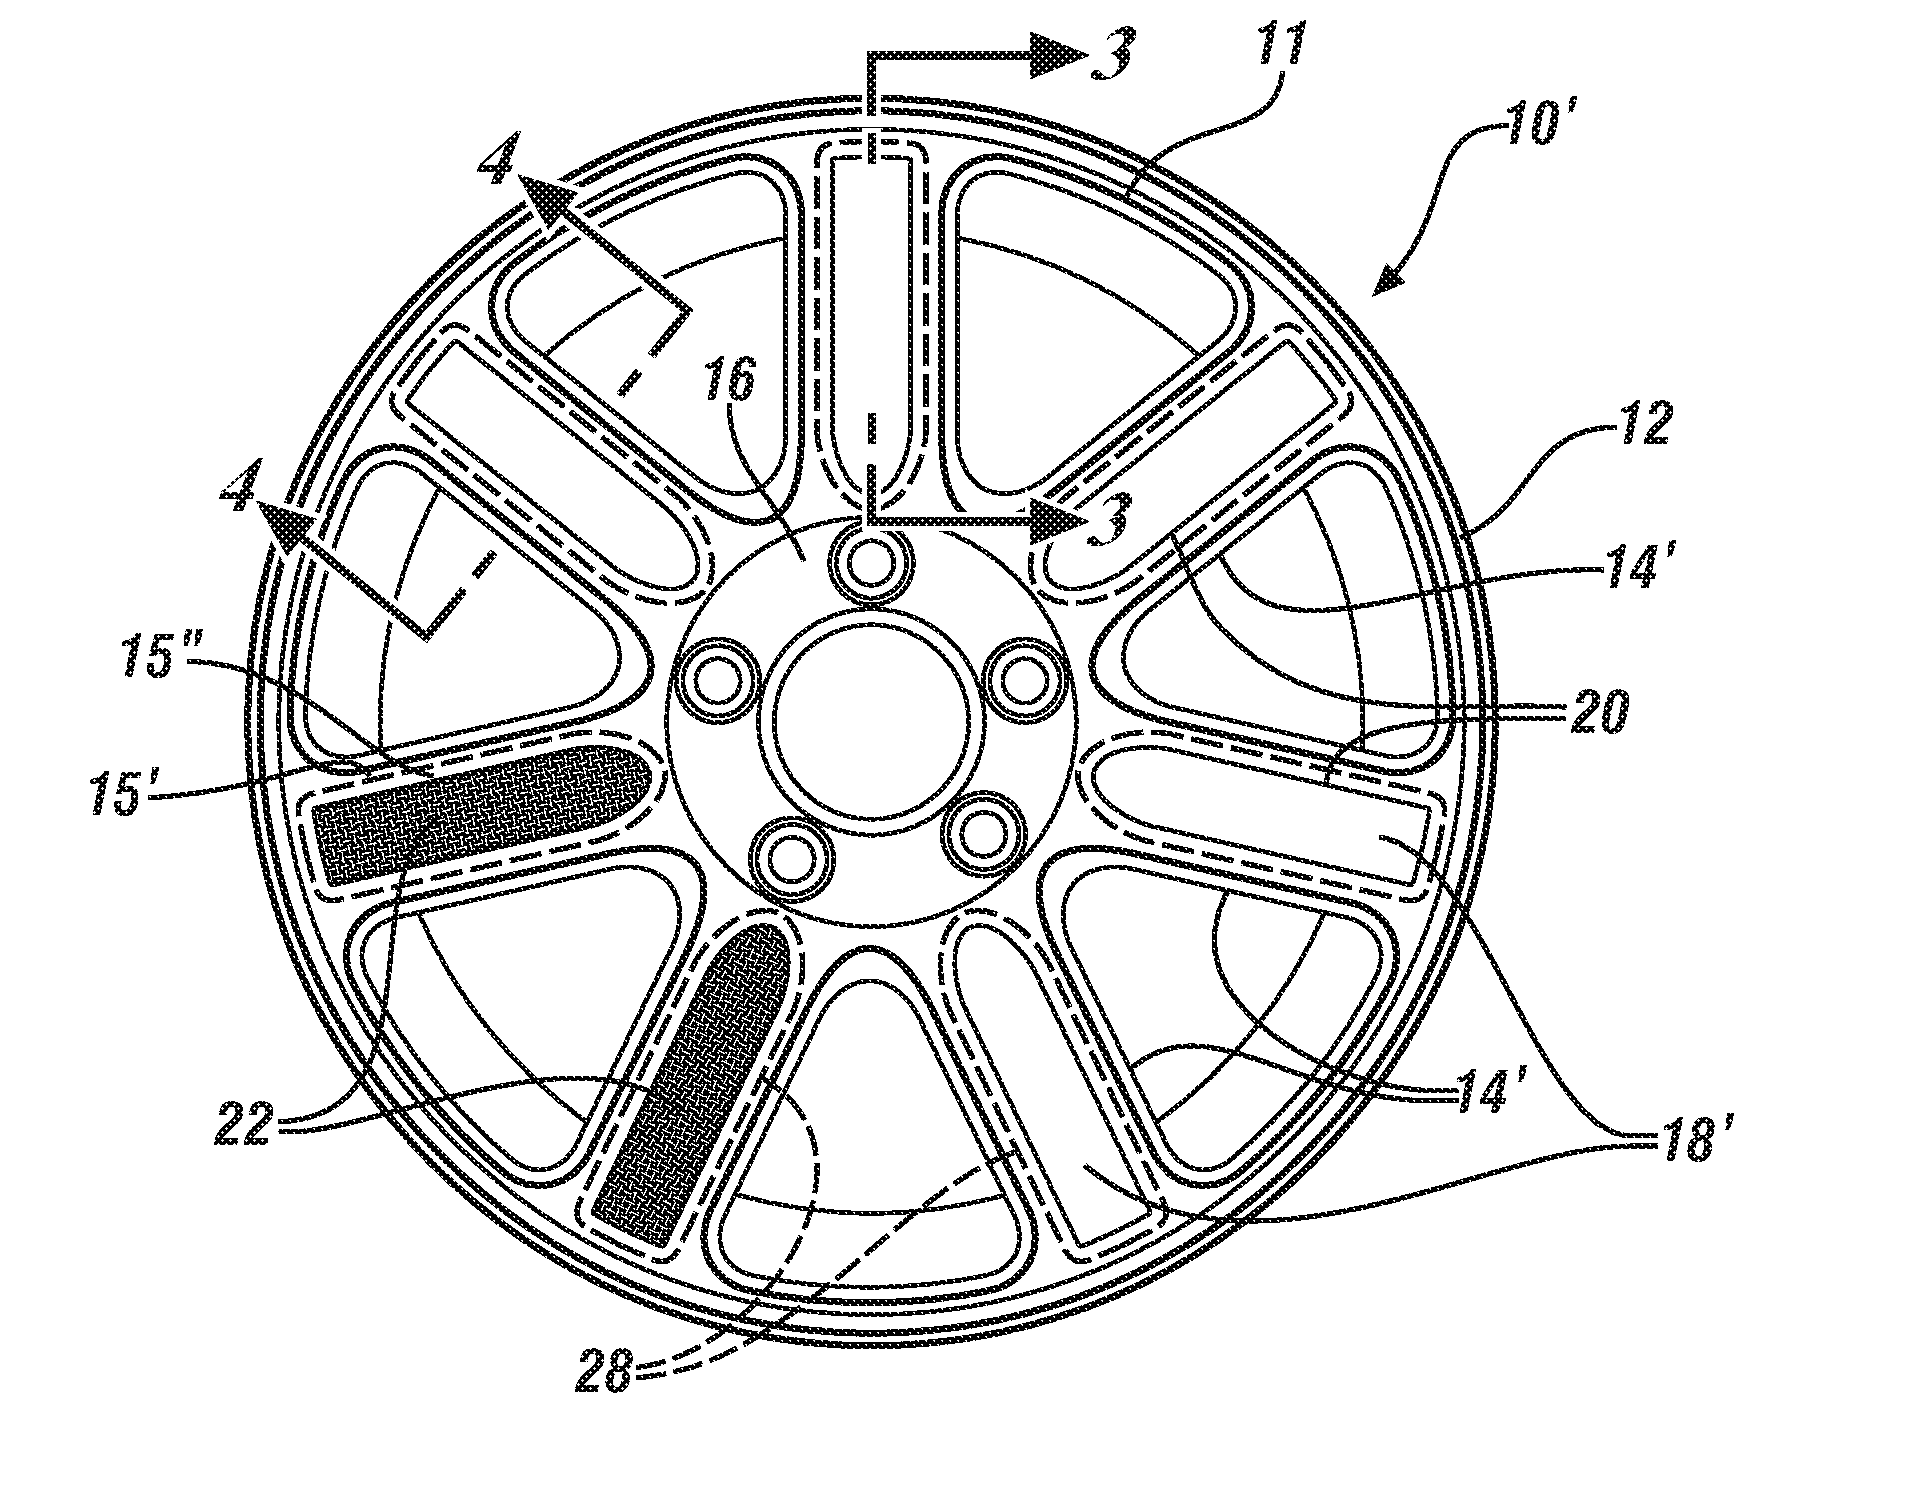 Light-weight vehicle wheels with carbon fiber inserts